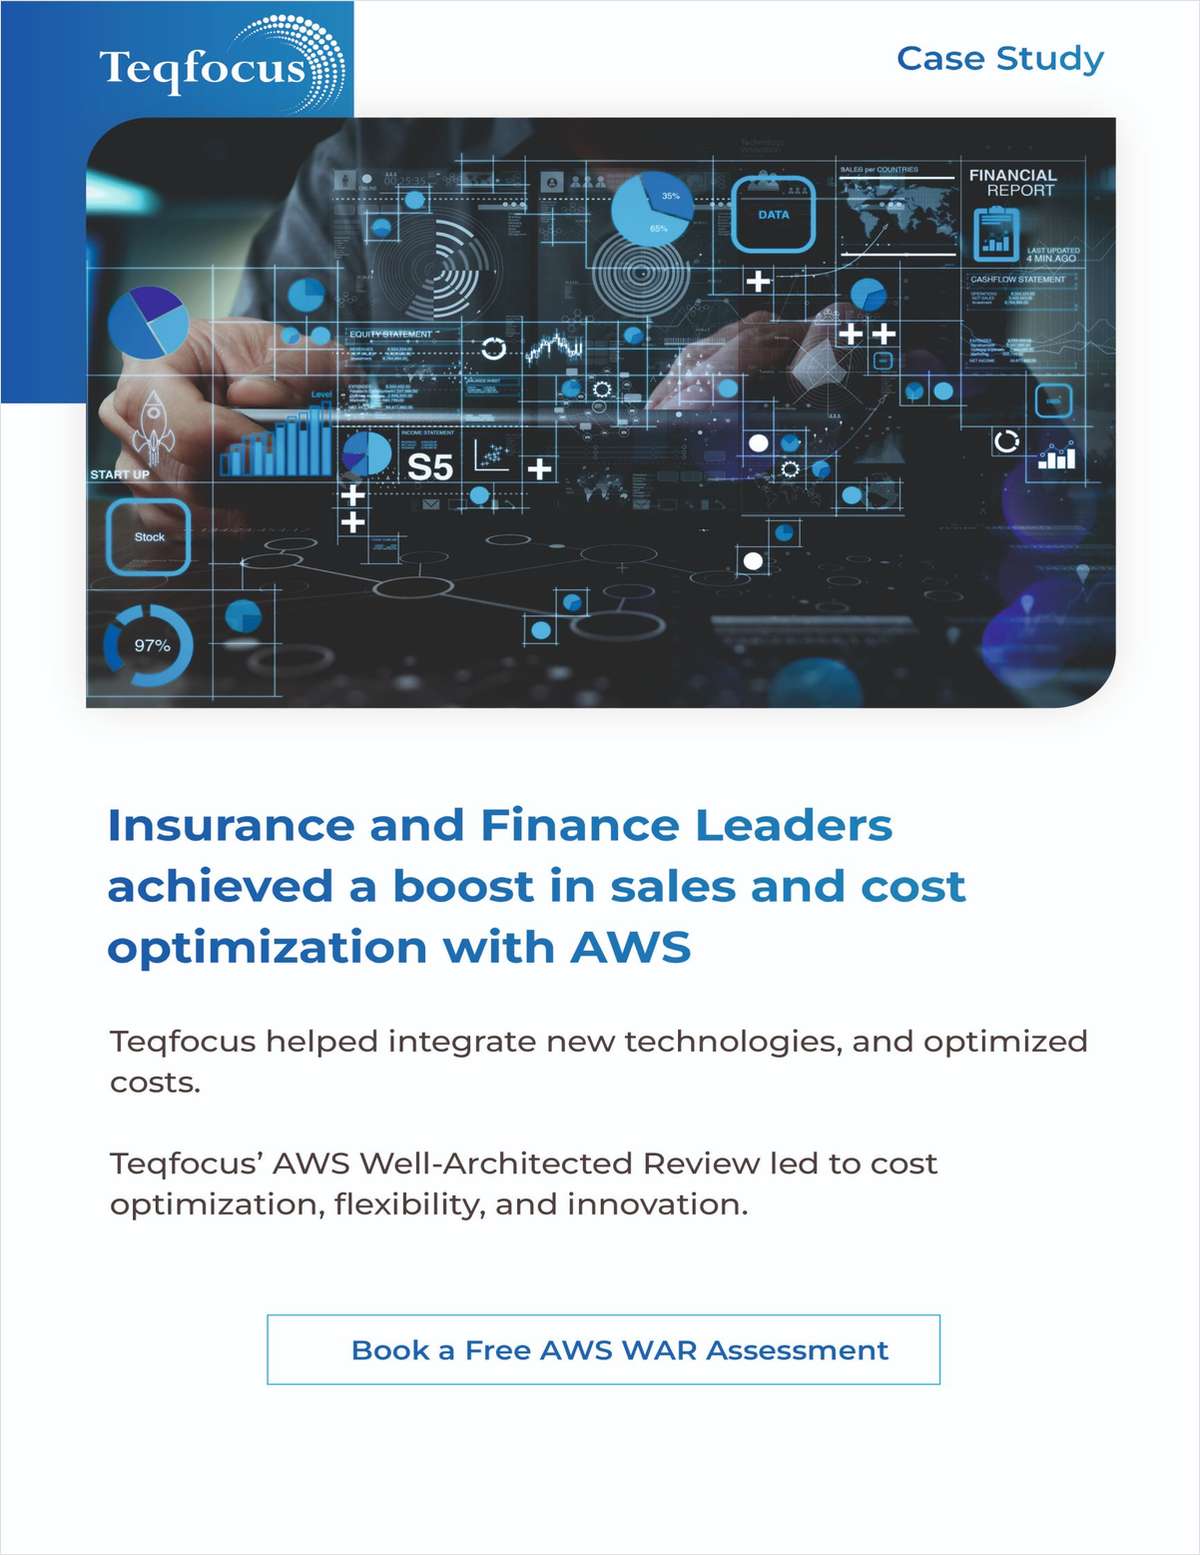 [Case Study] - Insurance and Finance leader saw a considerable boost in performance and cost reductions with AWS